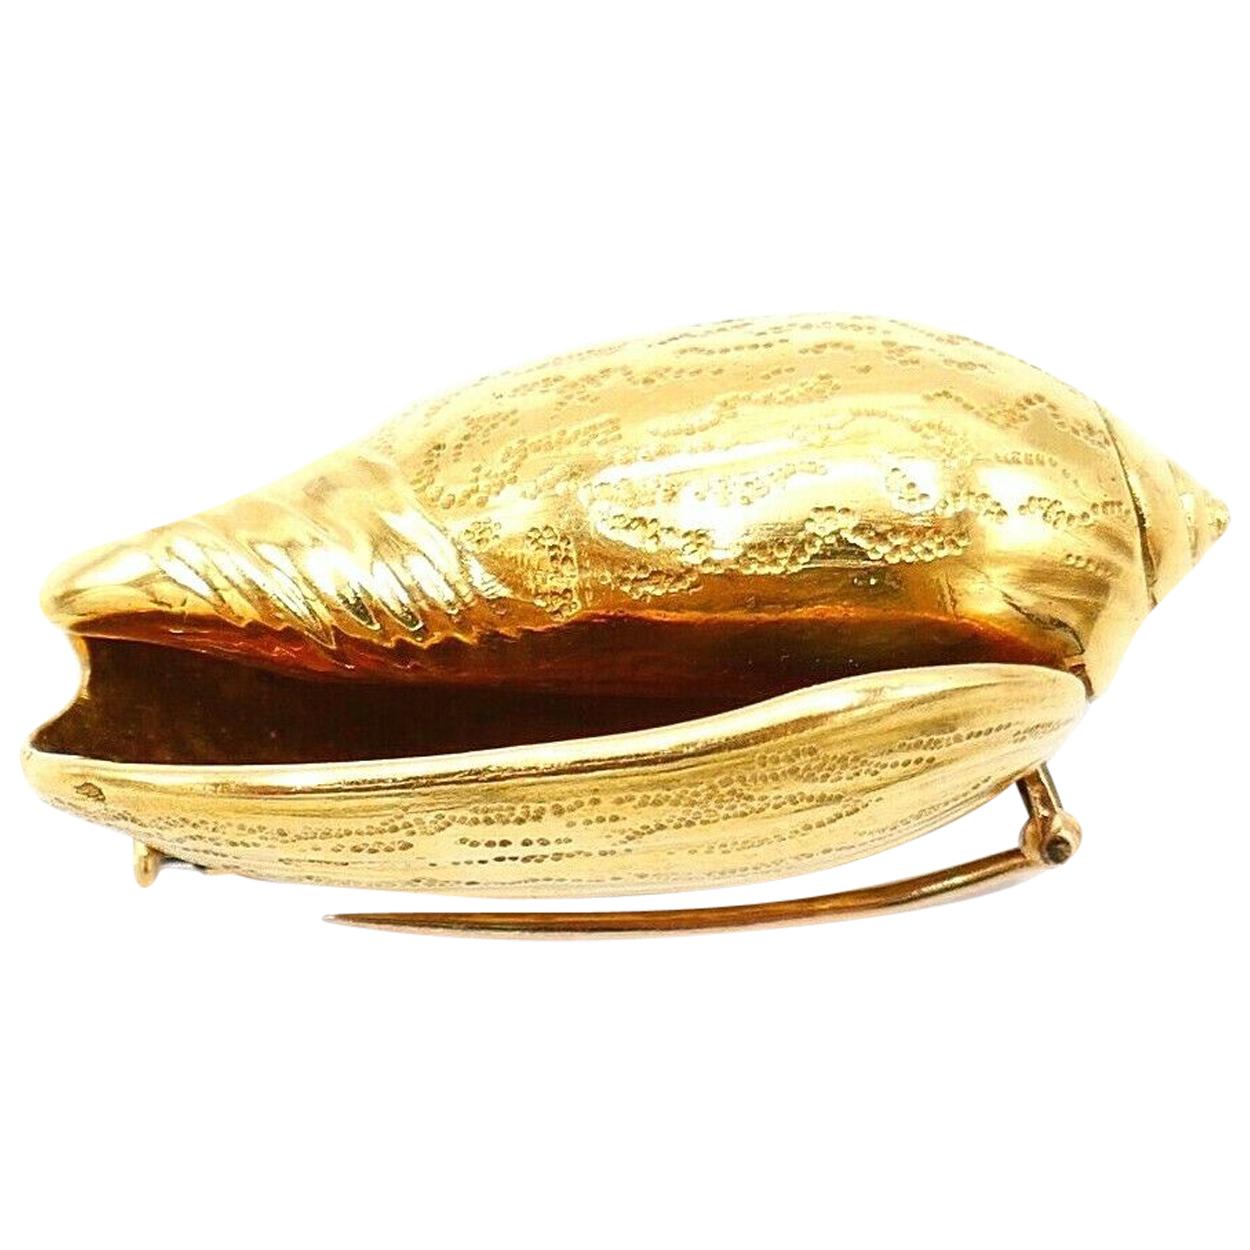 Adorable vintage Snail Shell pin brooch made by Hermès of 18k textured yellow gold. Stamped with Hermès maker's marks and a French mark.
Measurements: 1 3/4